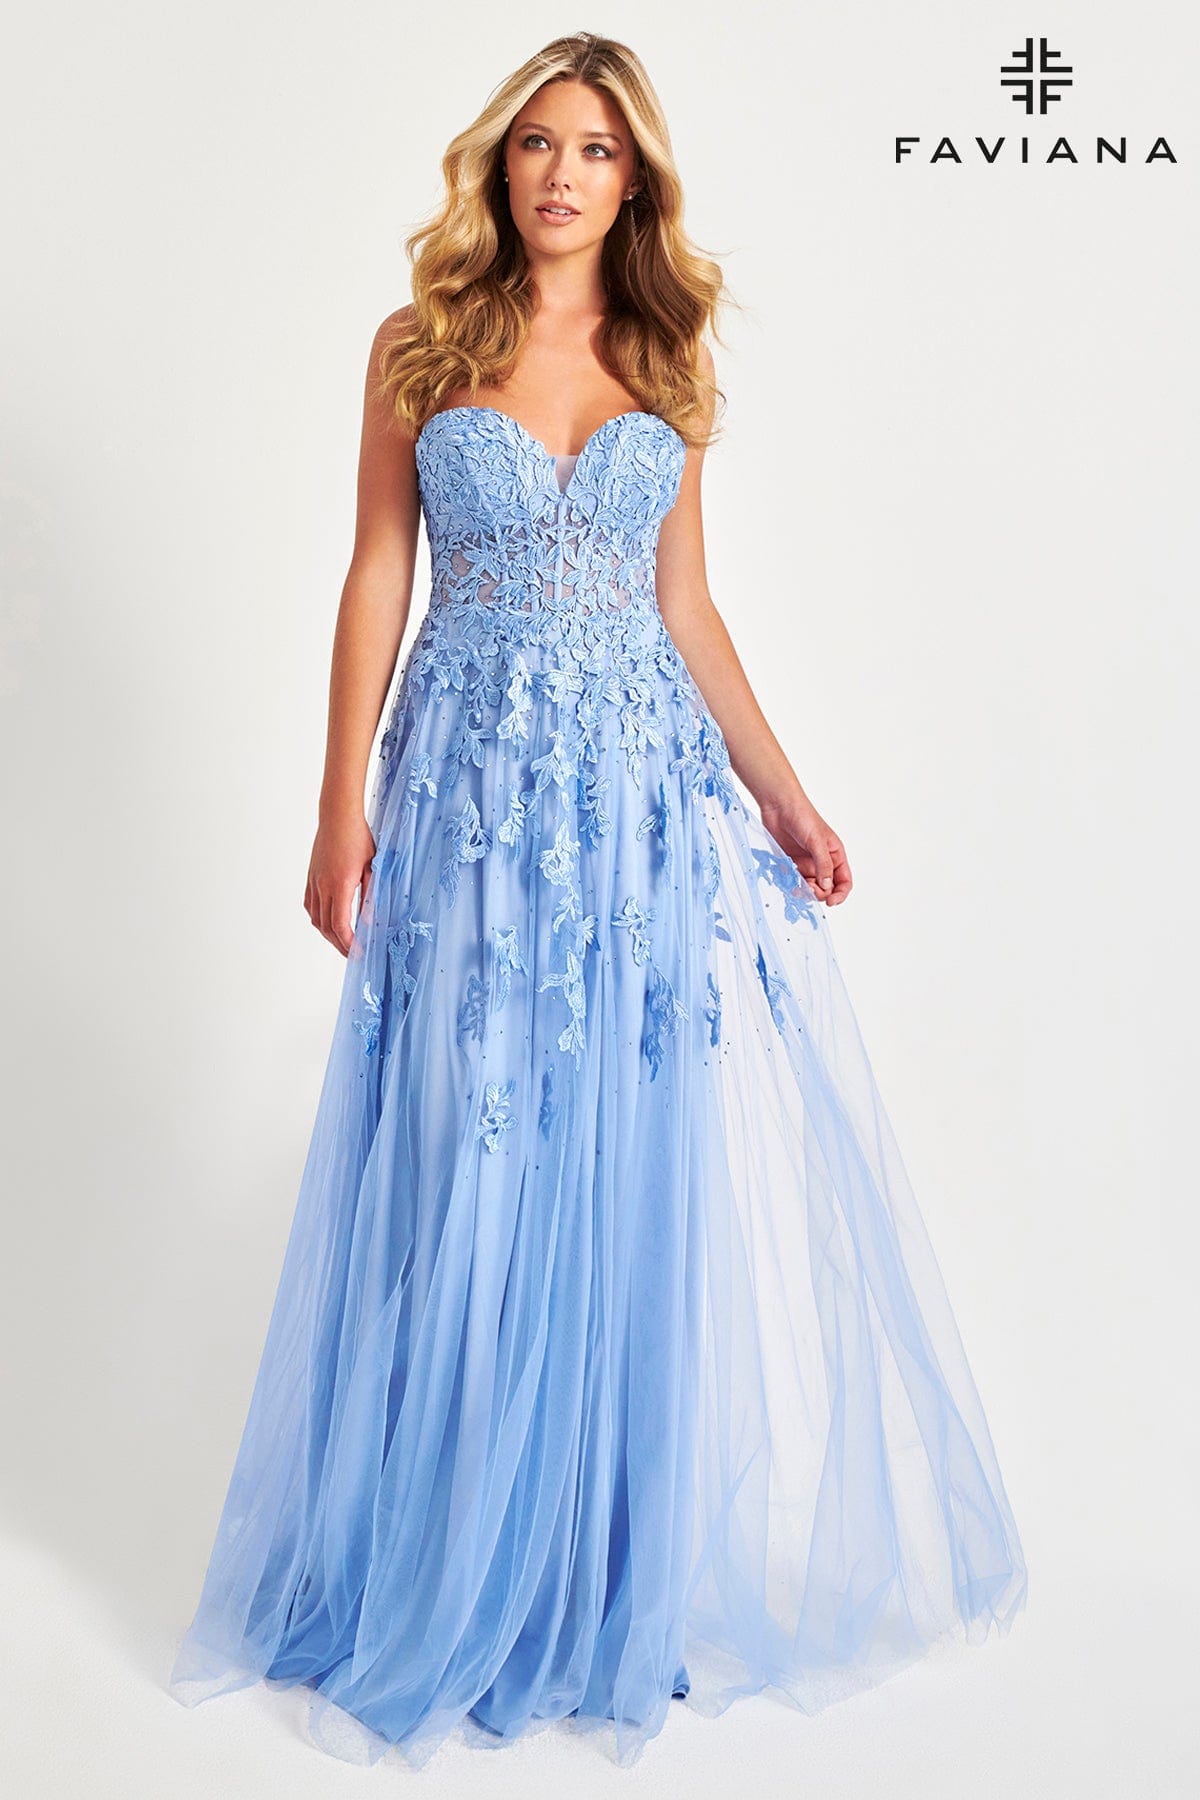 Cloud Blue Long Tulle Prom Dress With Corset Bodice And Lace Applique